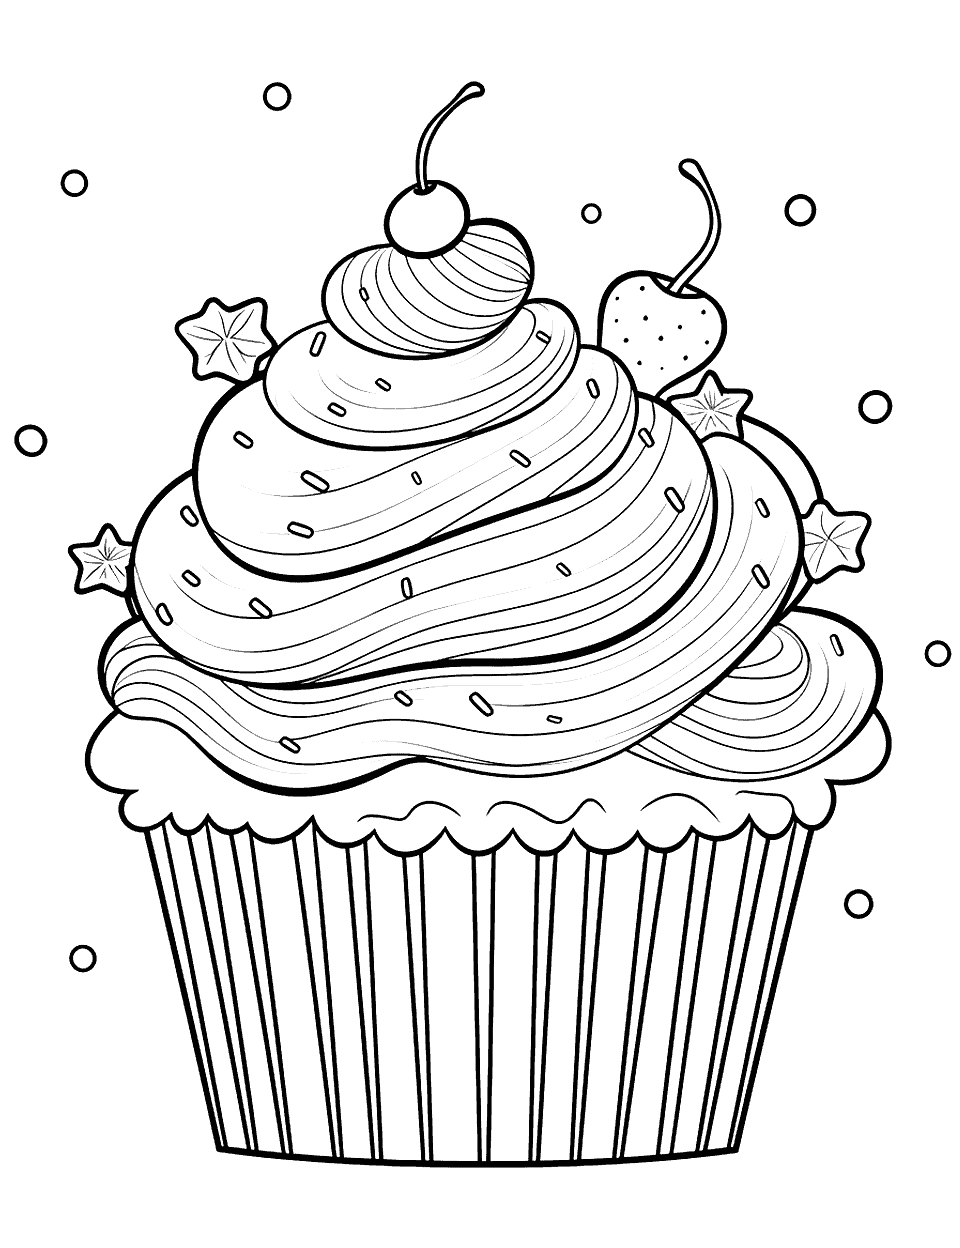 Detailed Cupcake Art Coloring Page - A cupcake with intricate designs and patterns.